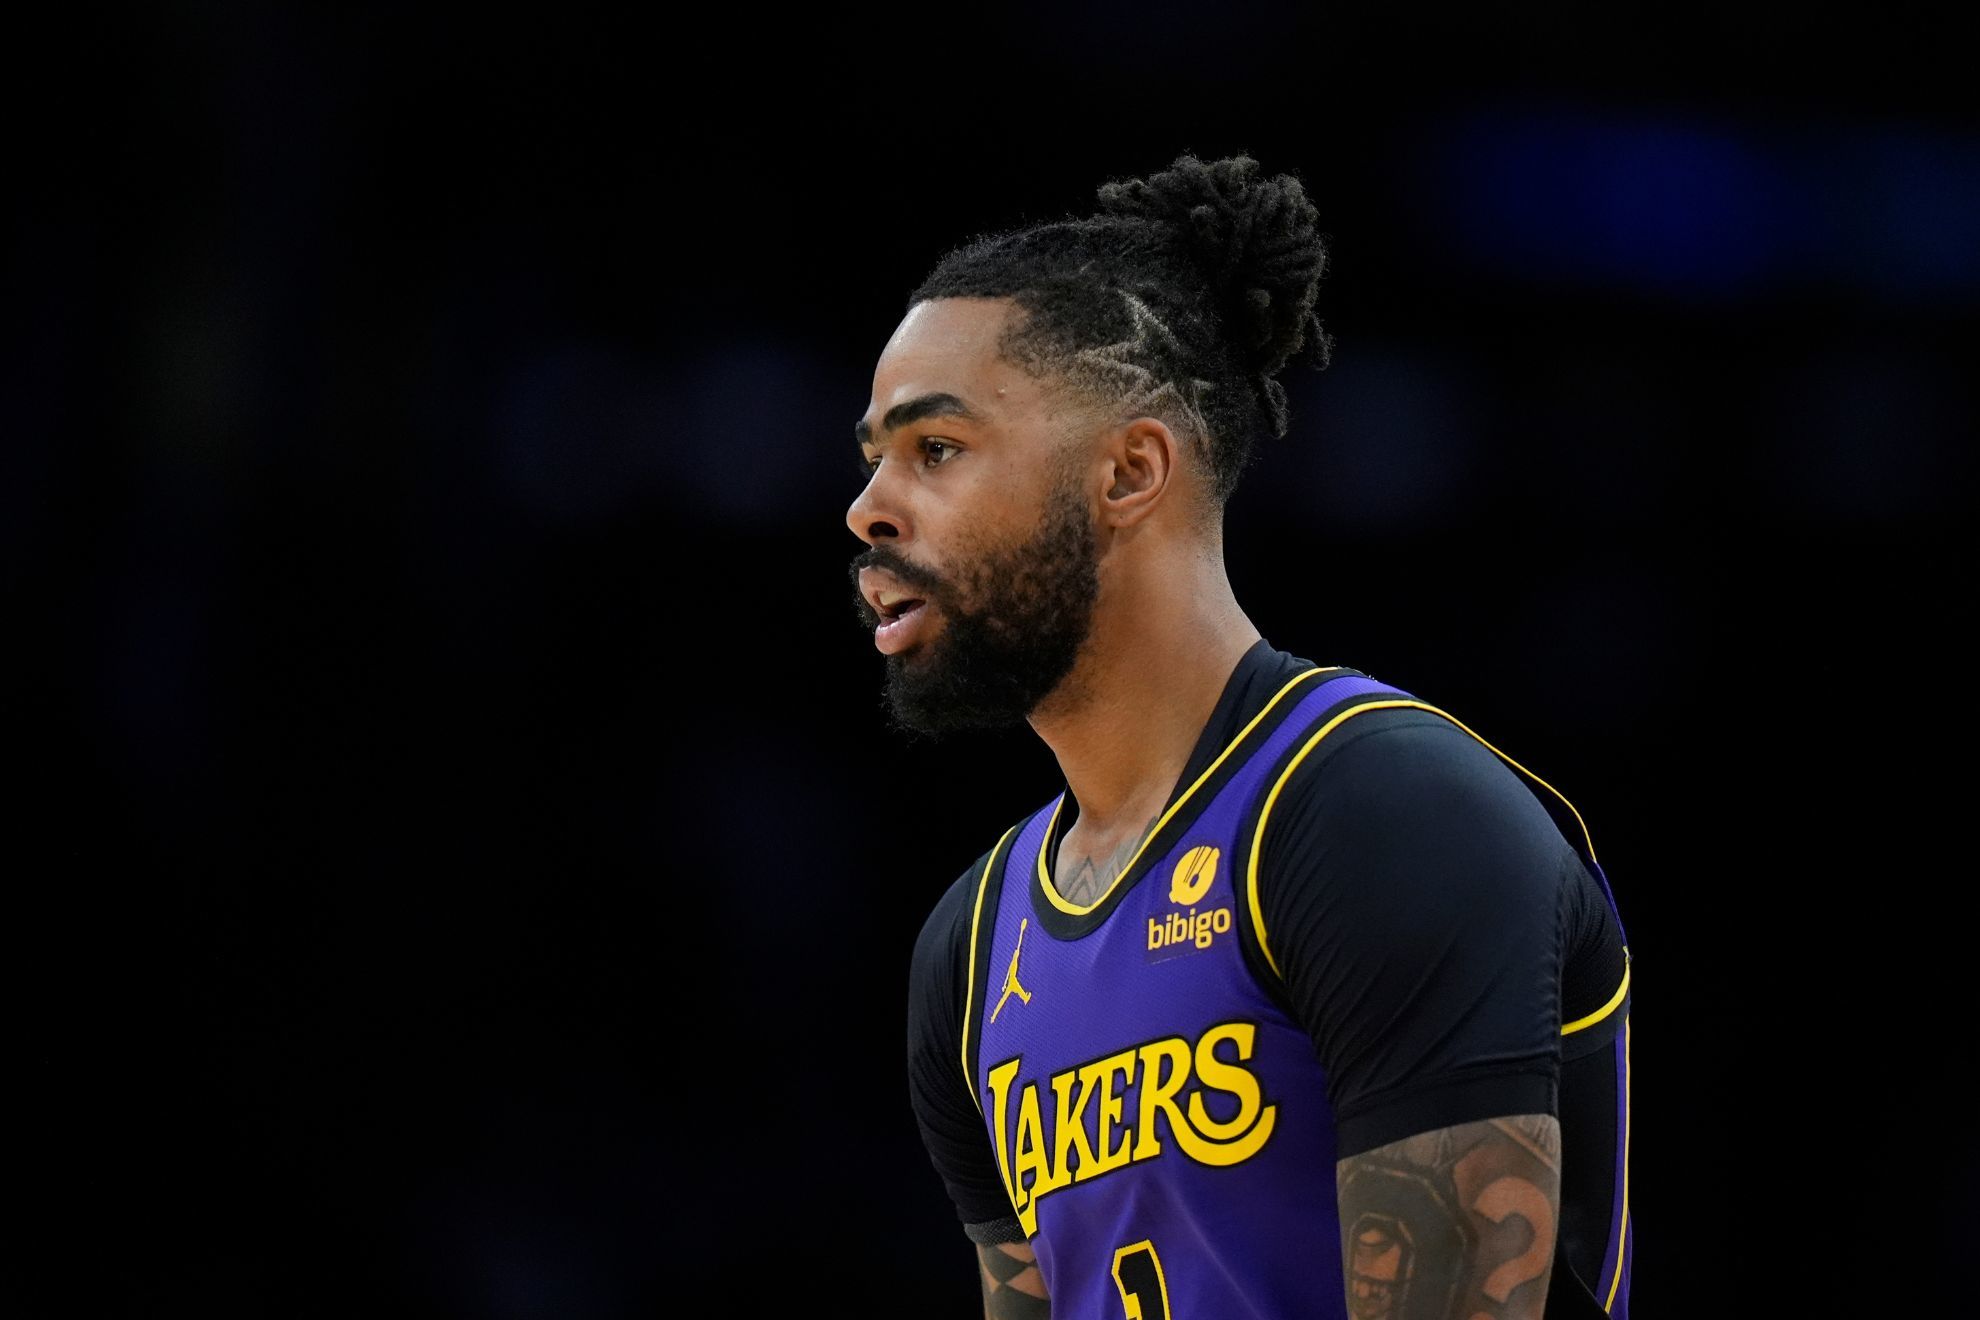 DAngelo Russell etches his name in Lakers history books with 3-pointers record